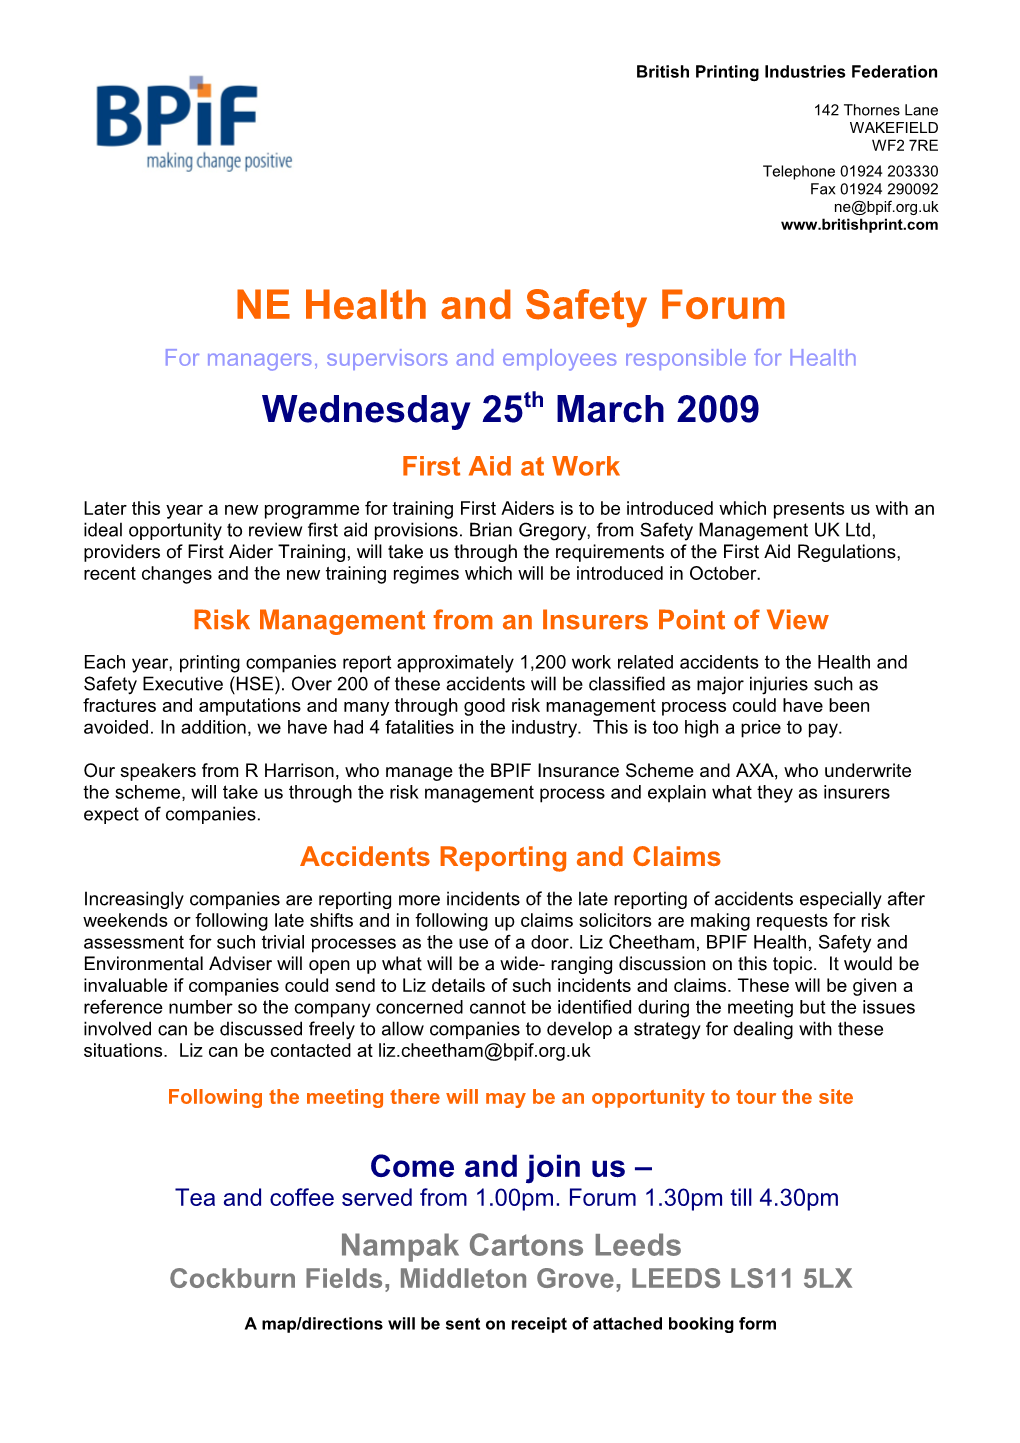 Health and Safety Forum